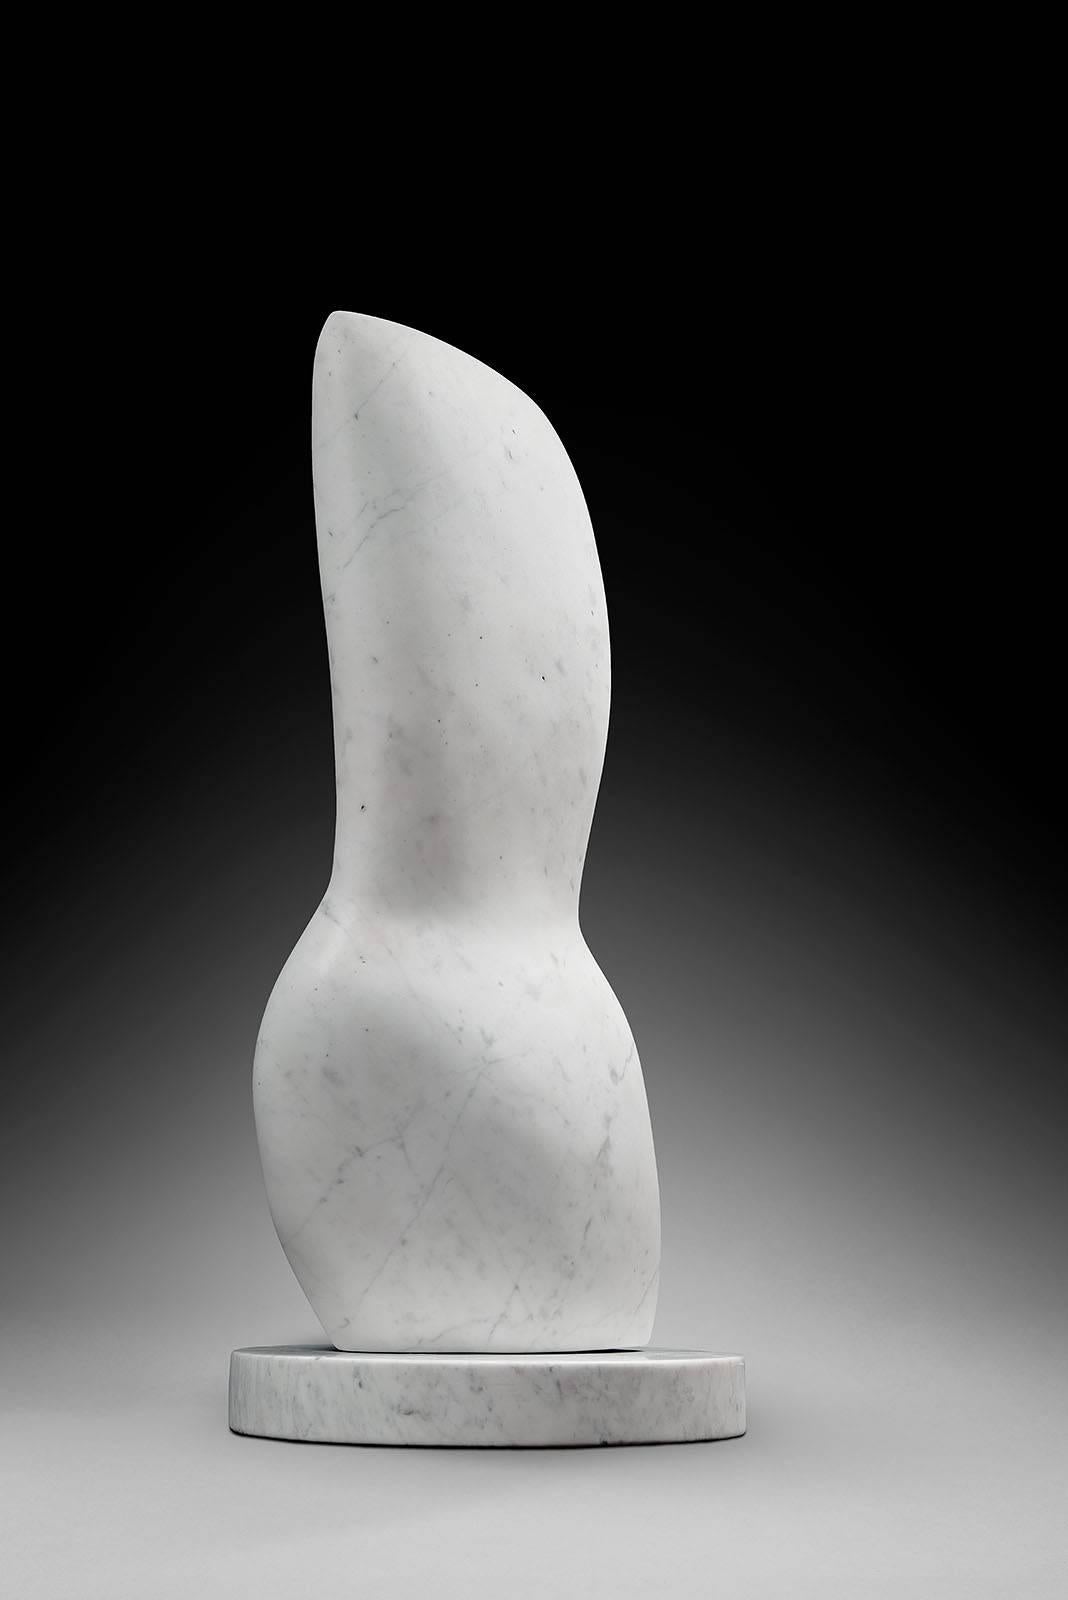 Direct carving in Carrara marble
Signed 